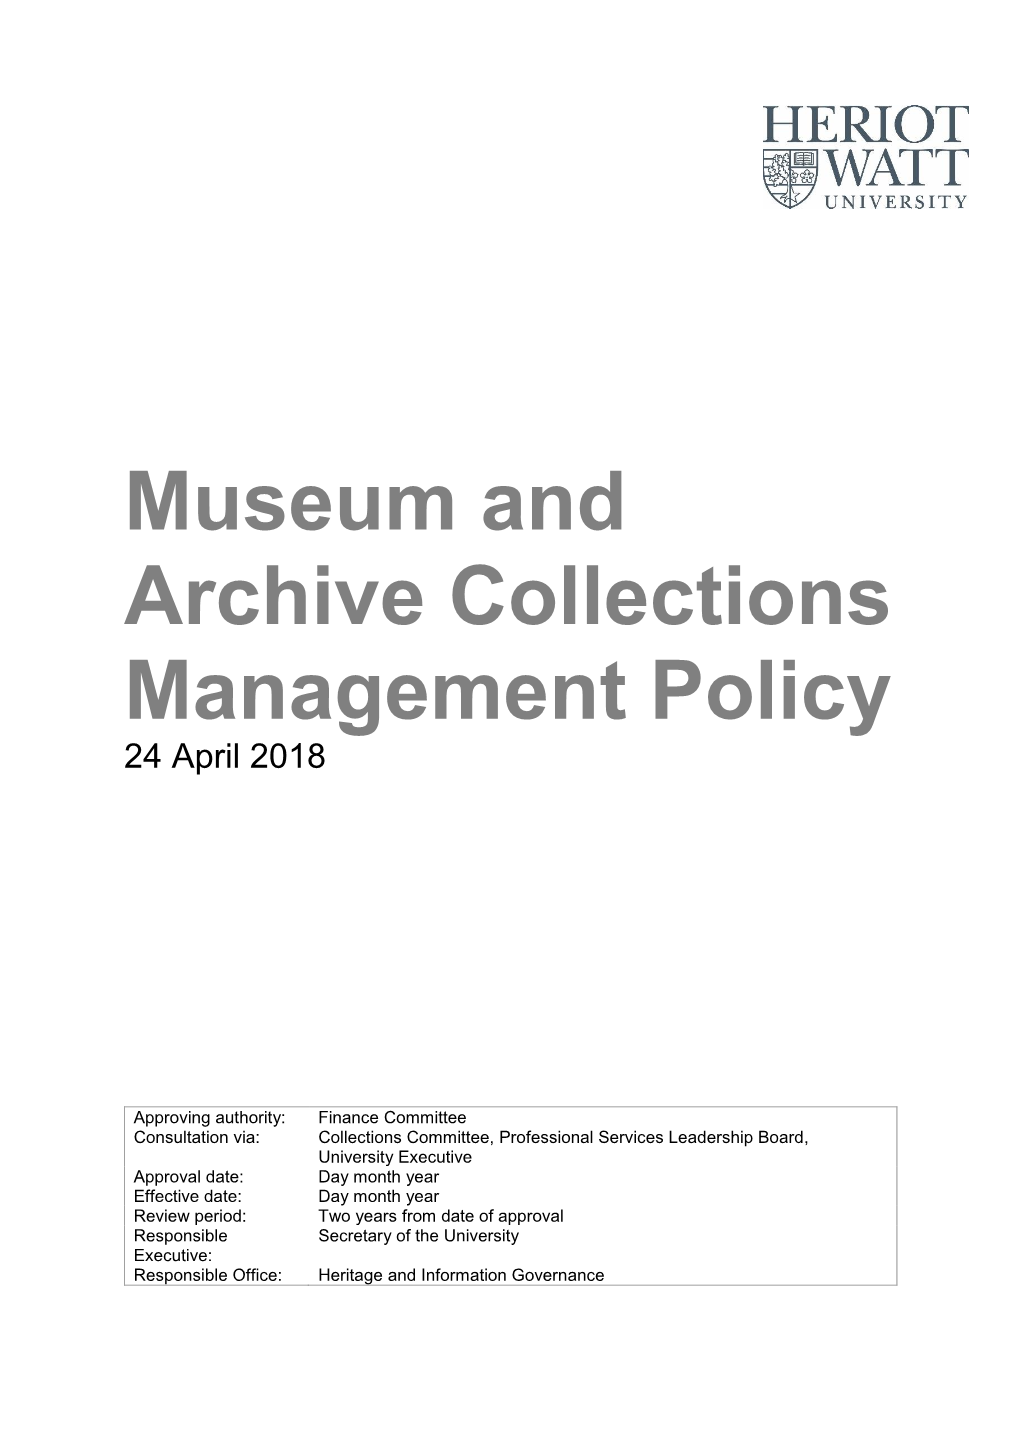 Museum and Archive Collections Management Policy 24 April 2018